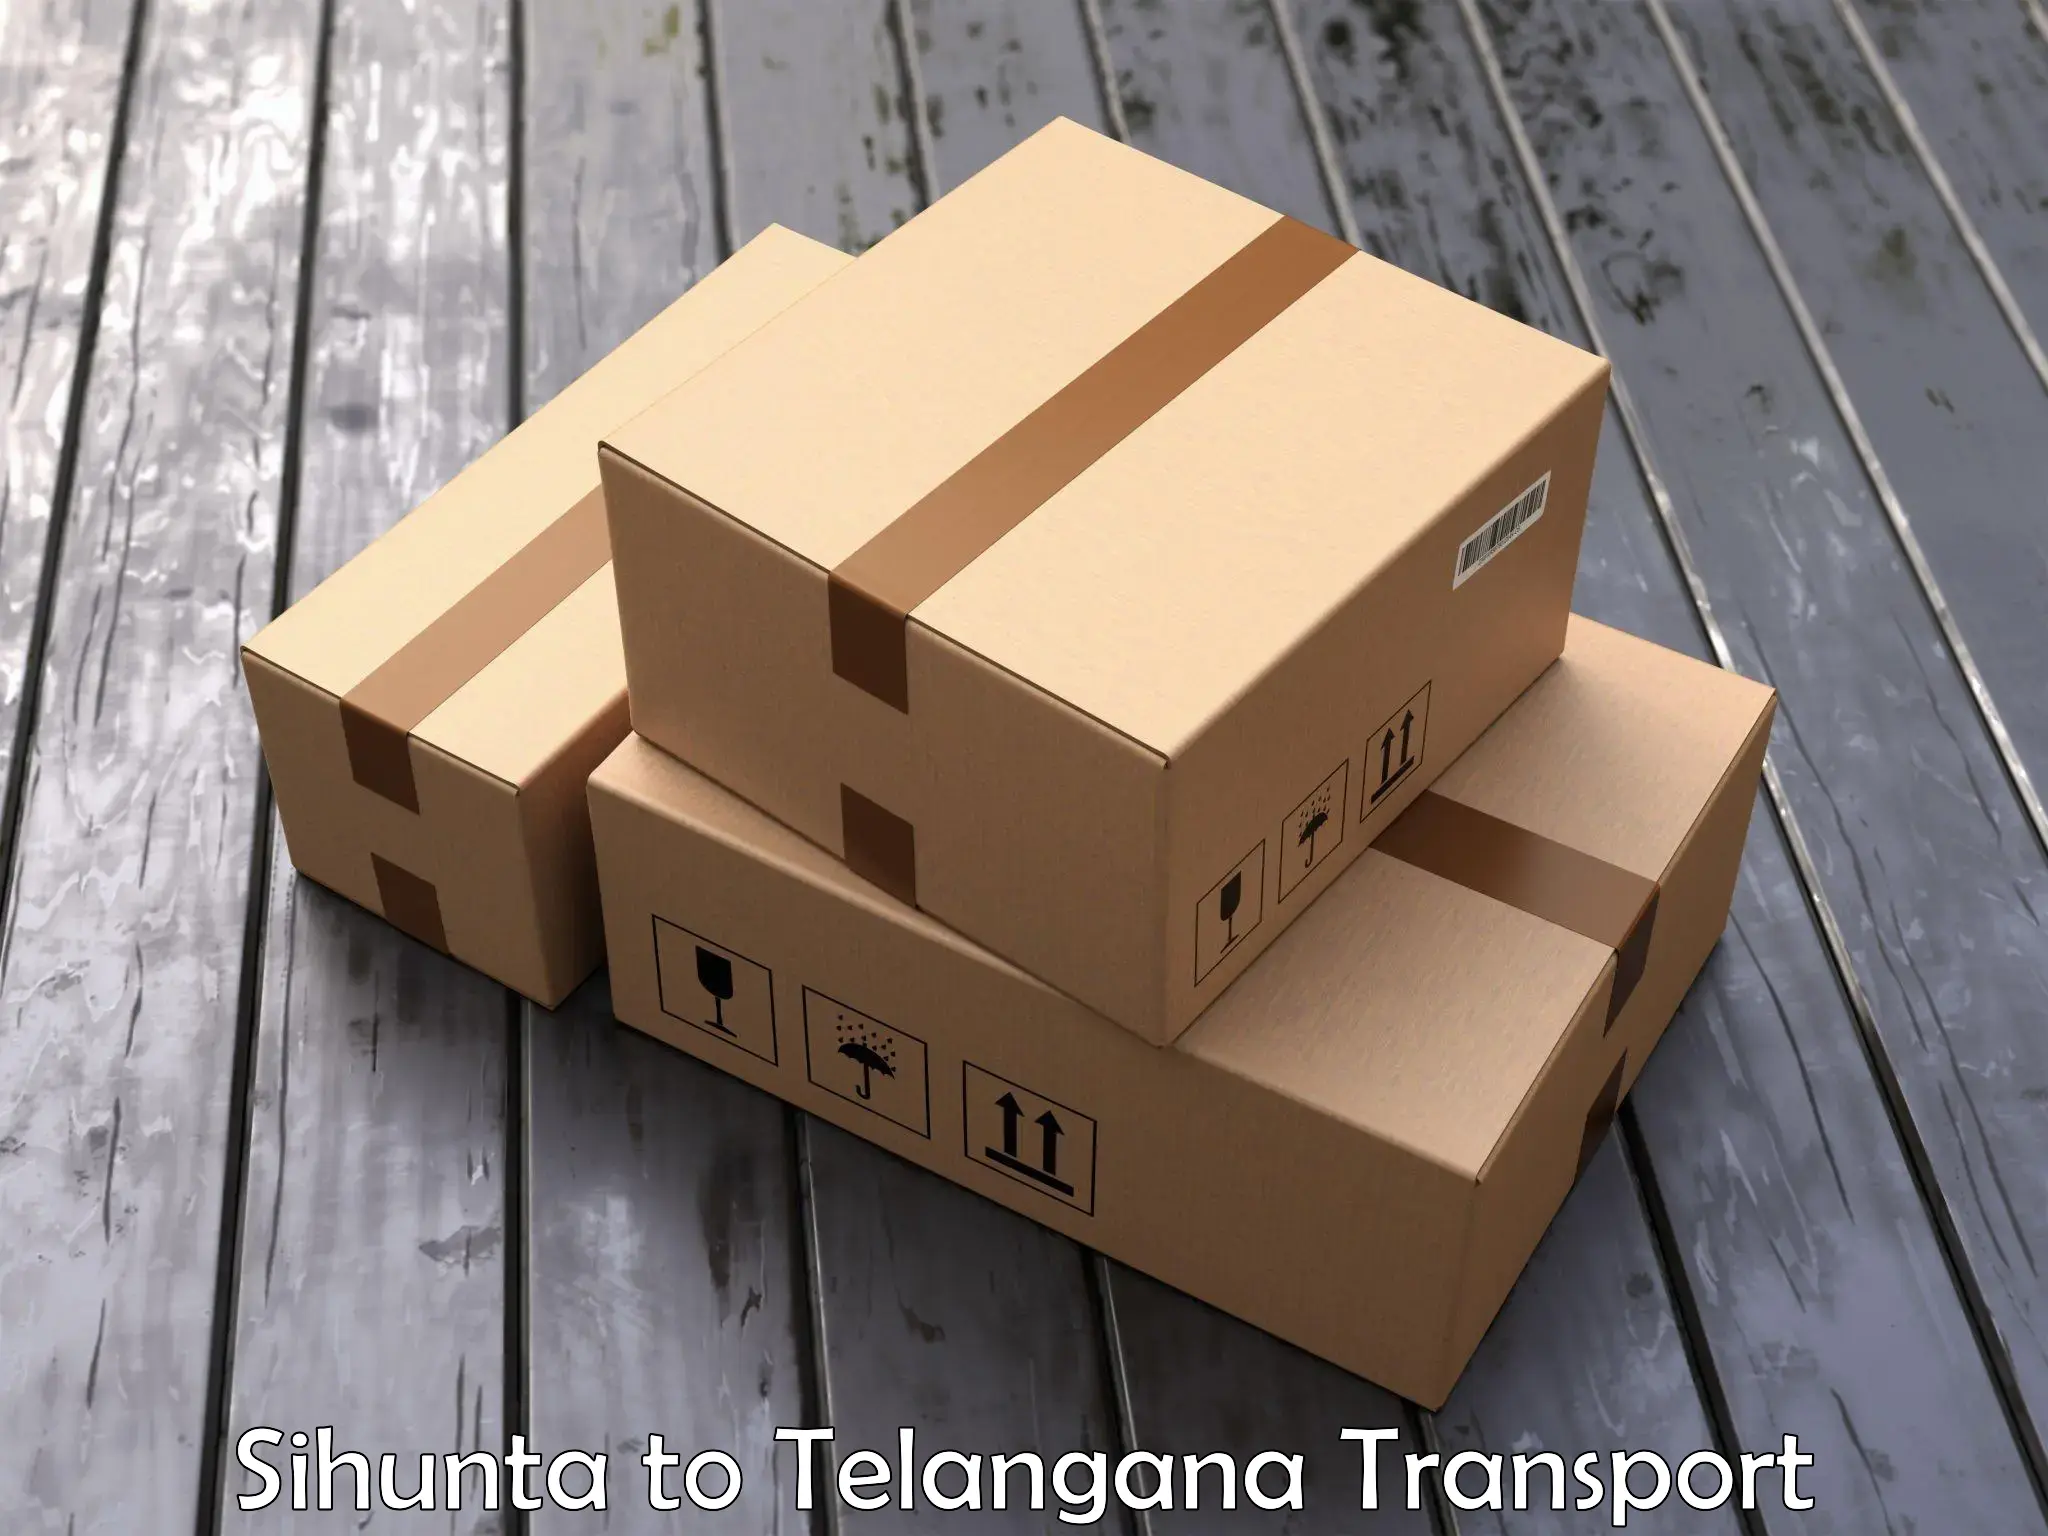 Delivery service Sihunta to Bhupalpally